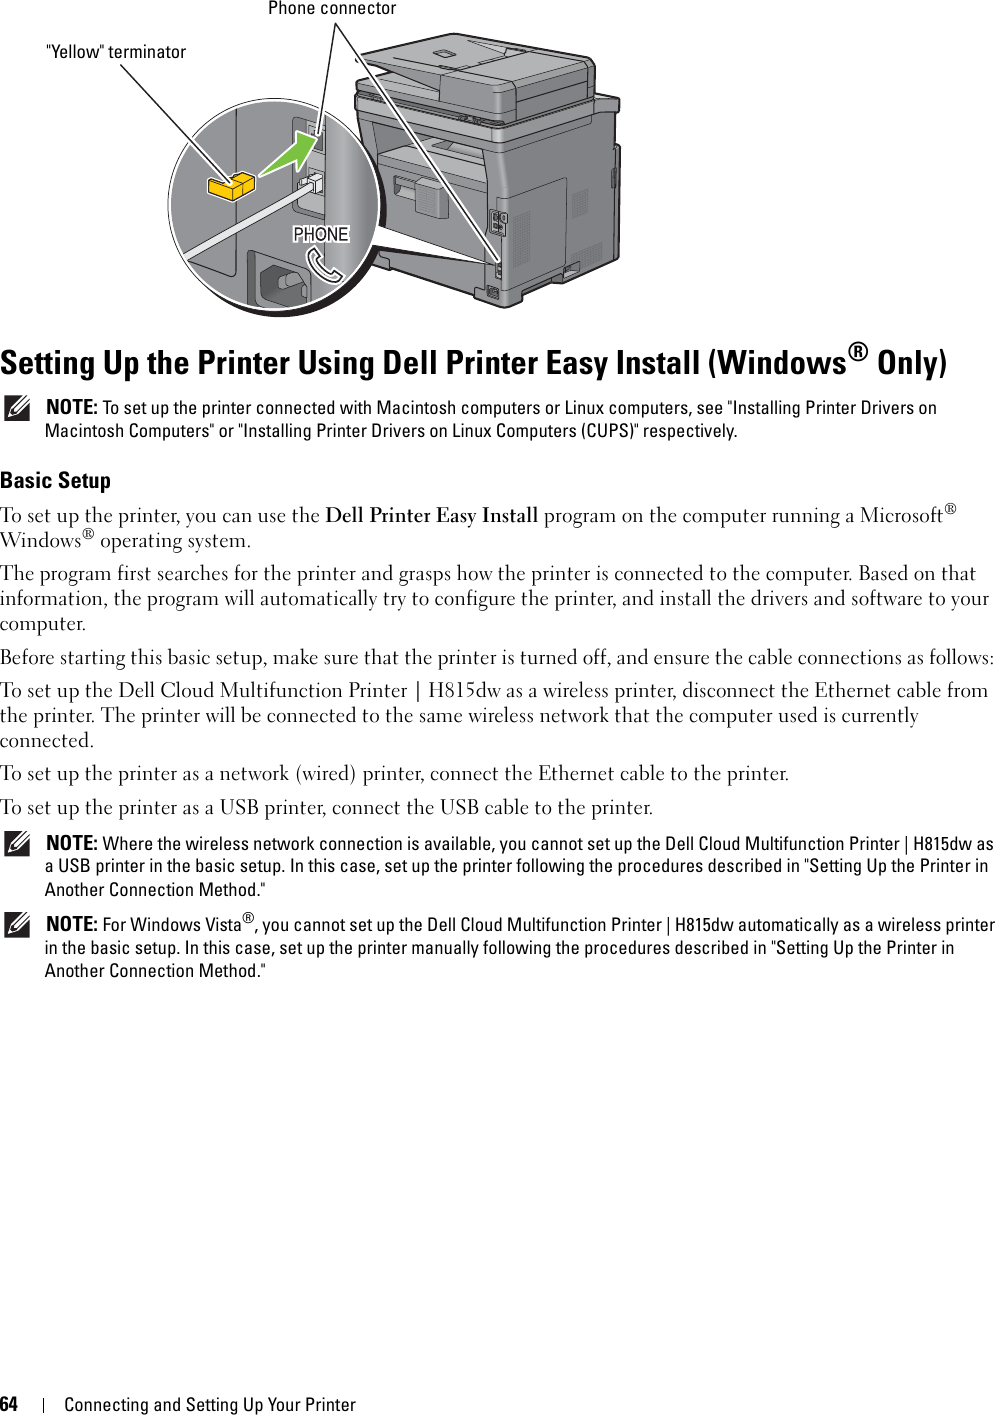 64Connecting and Setting Up Your PrinterSetting Up the Printer Using Dell Printer Easy Install (Windows® Only) NOTE: To set up the printer connected with Macintosh computers or Linux computers, see &quot;Installing Printer Drivers on Macintosh Computers&quot; or &quot;Installing Printer Drivers on Linux Computers (CUPS)&quot; respectively.Basic SetupTo set up the printer, you can use the Dell Printer Easy Install program on the computer running a Microsoft® Windows® operating system. The program first searches for the printer and grasps how the printer is connected to the computer. Based on that information, the program will automatically try to configure the printer, and install the drivers and software to your computer. Before starting this basic setup, make sure that the printer is turned off, and ensure the cable connections as follows: To set up the Dell Cloud Multifunction Printer | H815dw as a wireless printer, disconnect the Ethernet cable from the printer. The printer will be connected to the same wireless network that the computer used is currently connected.To set up the printer as a network (wired) printer, connect the Ethernet cable to the printer. To set up the printer as a USB printer, connect the USB cable to the printer.  NOTE: Where the wireless network connection is available, you cannot set up the Dell Cloud Multifunction Printer | H815dw as a USB printer in the basic setup. In this case, set up the printer following the procedures described in &quot;Setting Up the Printer in Another Connection Method.&quot;  NOTE: For Windows Vista®, you cannot set up the Dell Cloud Multifunction Printer | H815dw automatically as a wireless printer in the basic setup. In this case, set up the printer manually following the procedures described in &quot;Setting Up the Printer in Another Connection Method.&quot; Phone connector&quot;Yellow&quot; terminator